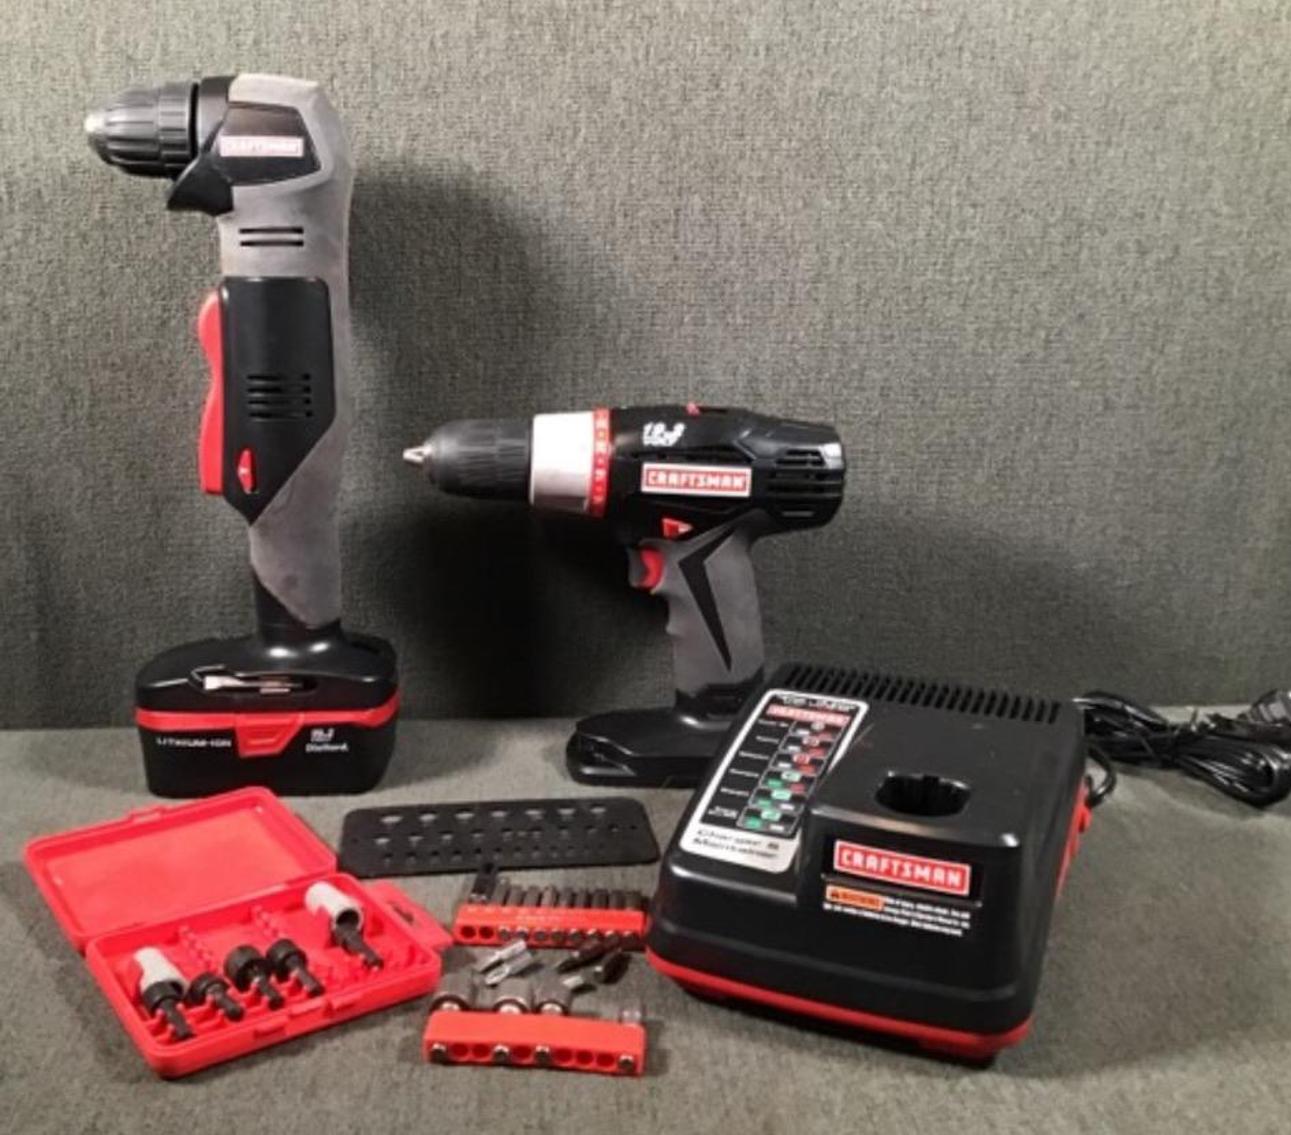 Image for Craftsman Rechargeable Drill Set